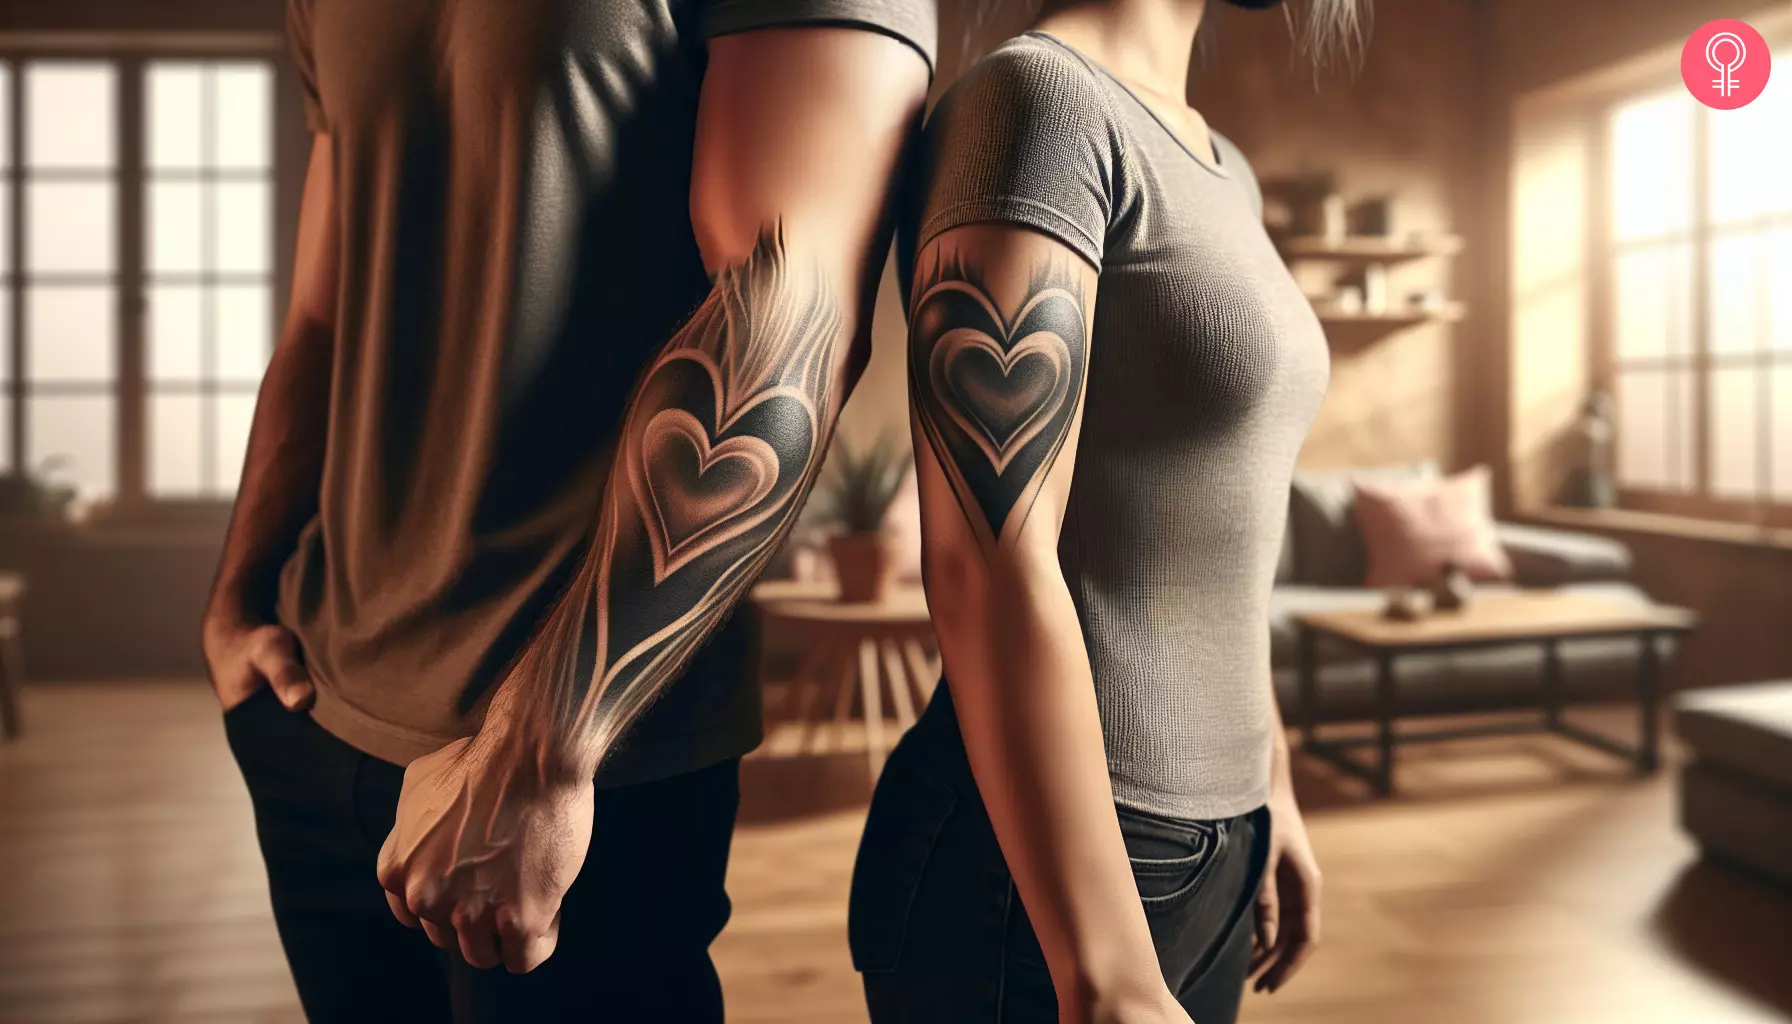 A couple with matching love tattoos